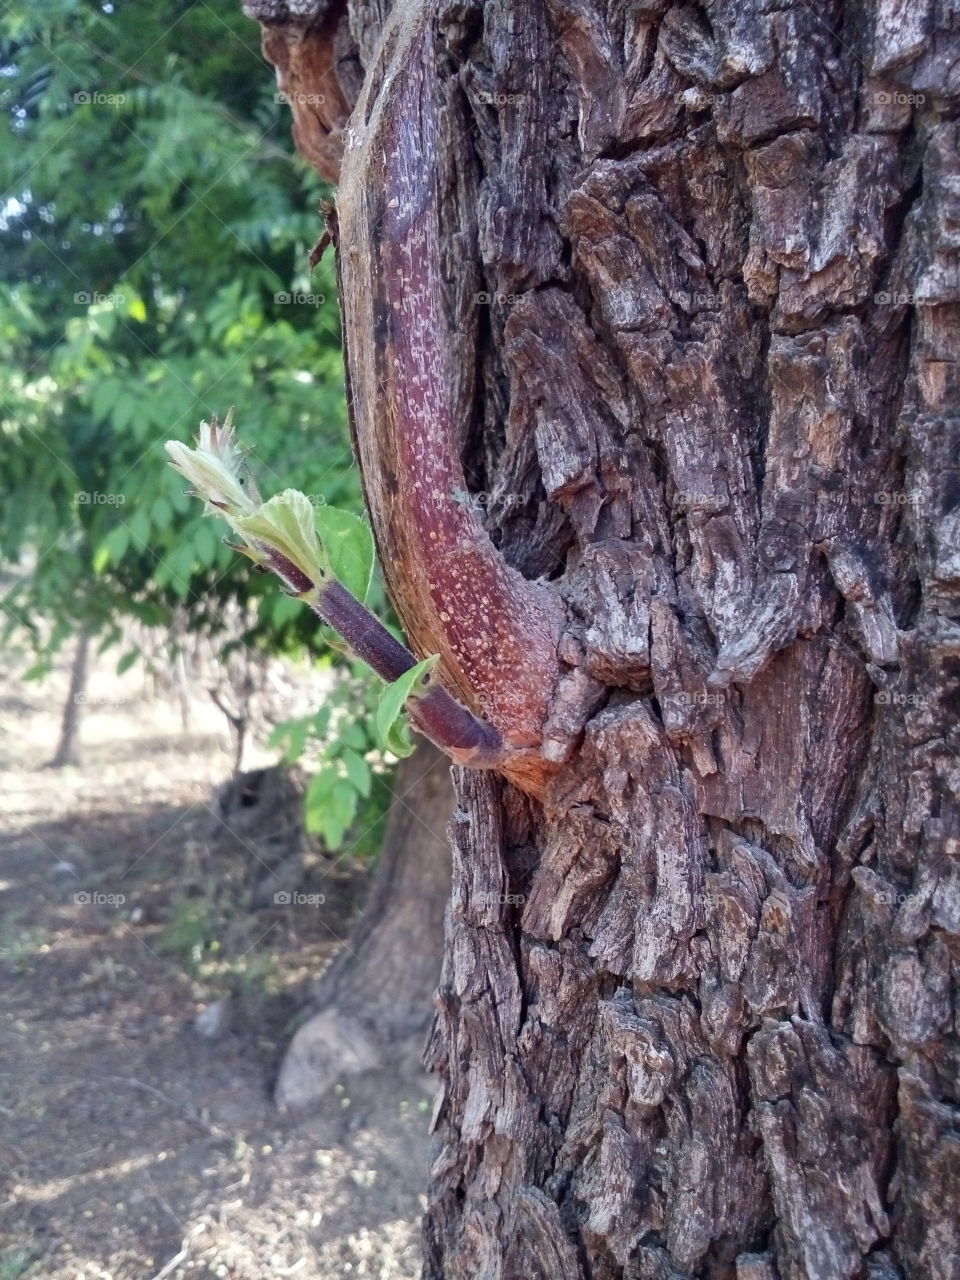 beginning of new branch in the tree.